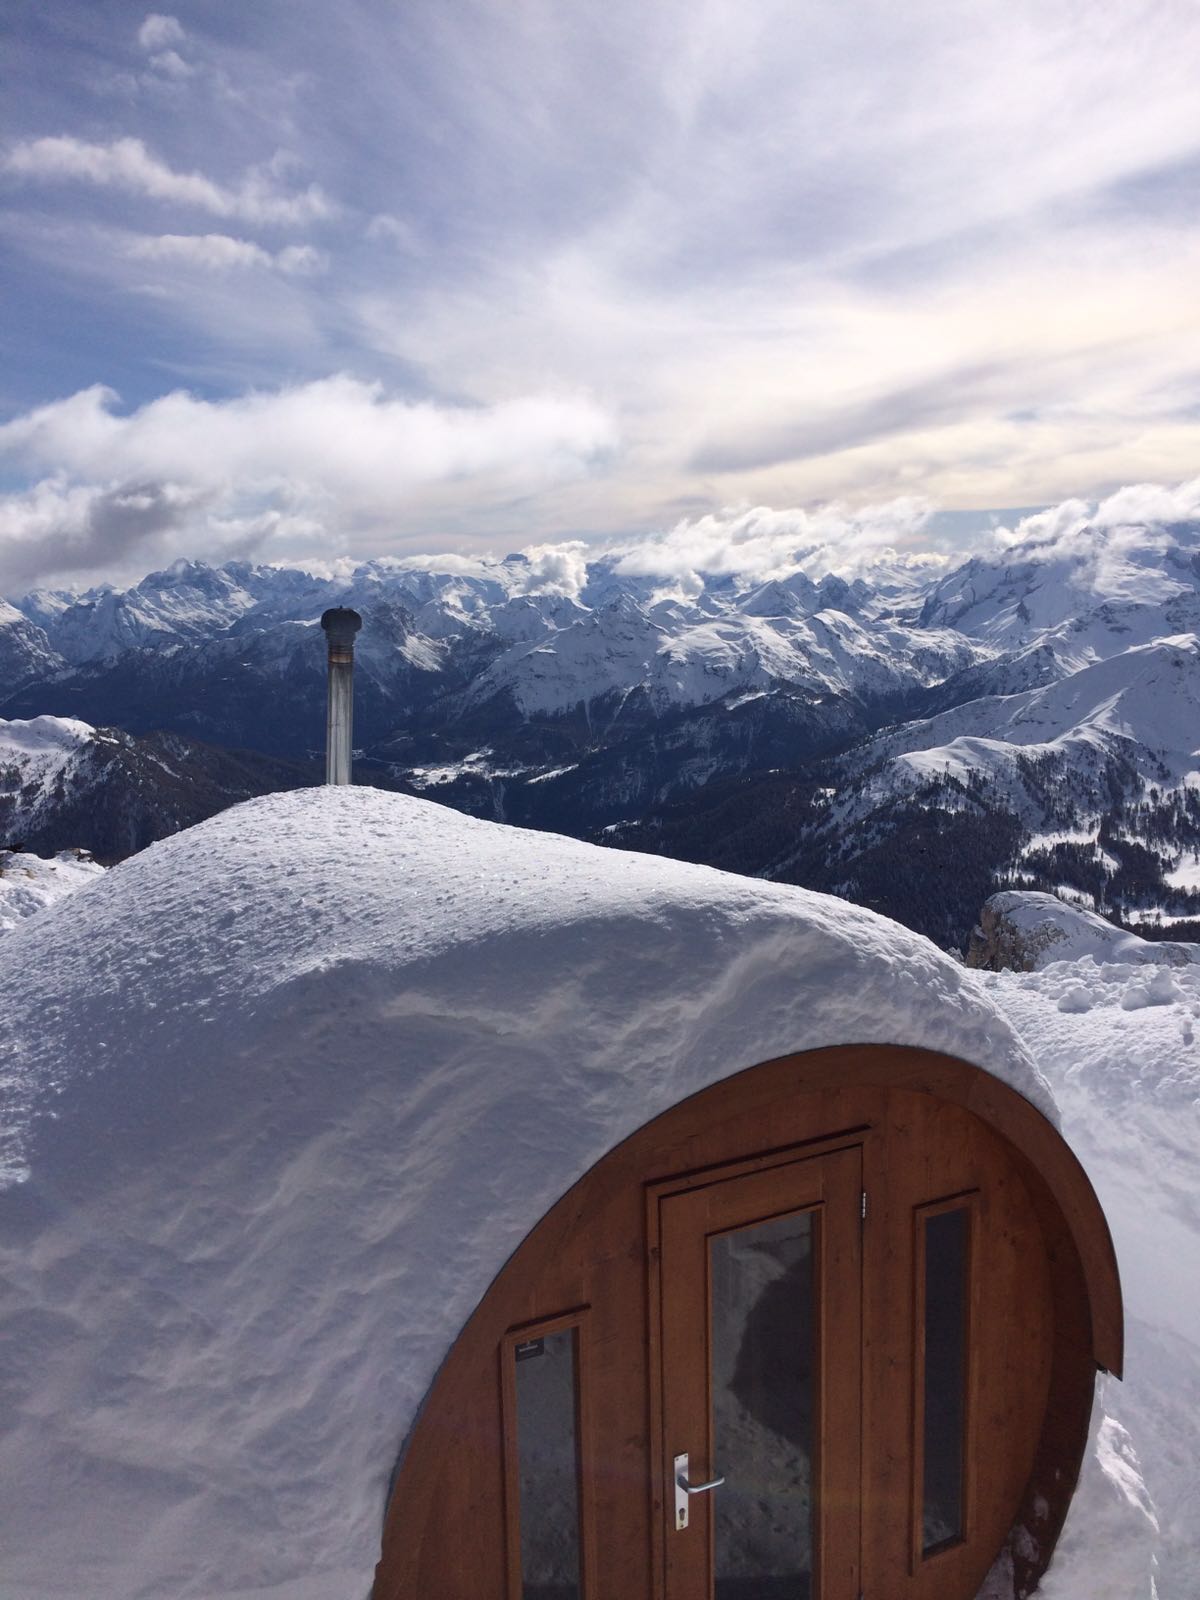 Rifugio Lagazuoi. A special place in paradise. View of the sauna with a view. Photo: Cortina Marketing. Cortina D’Ampezzo is gearing up for a great winter season and the 2021 Ski World Championships.